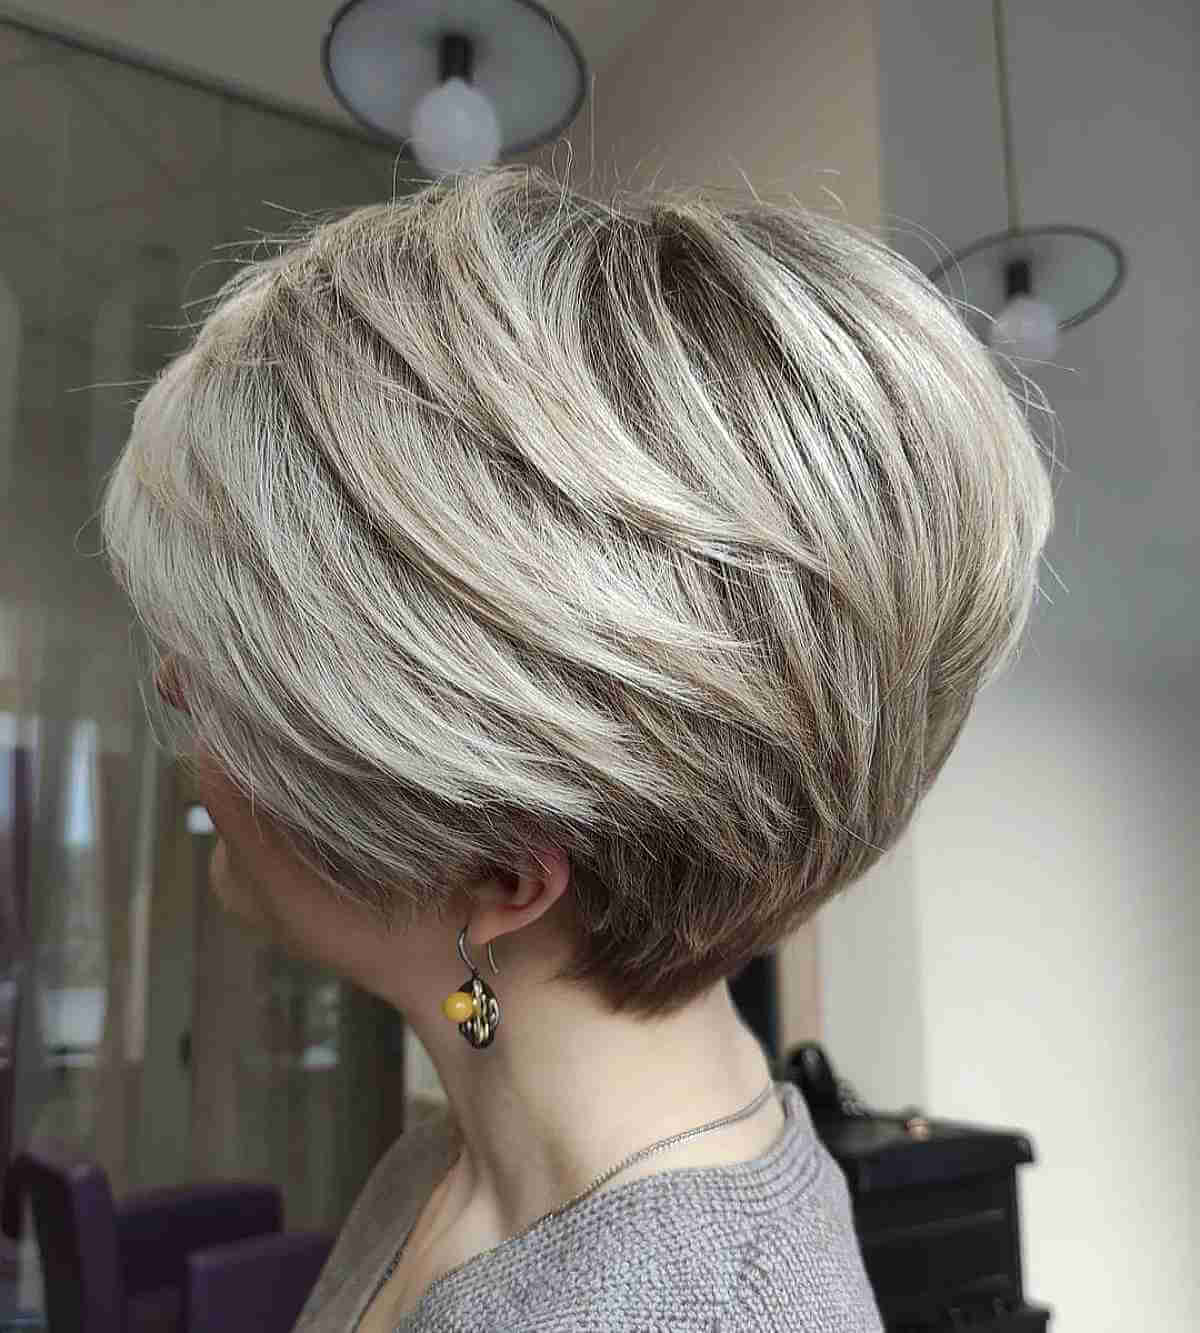 Feathered Long Pixie Hairstyle